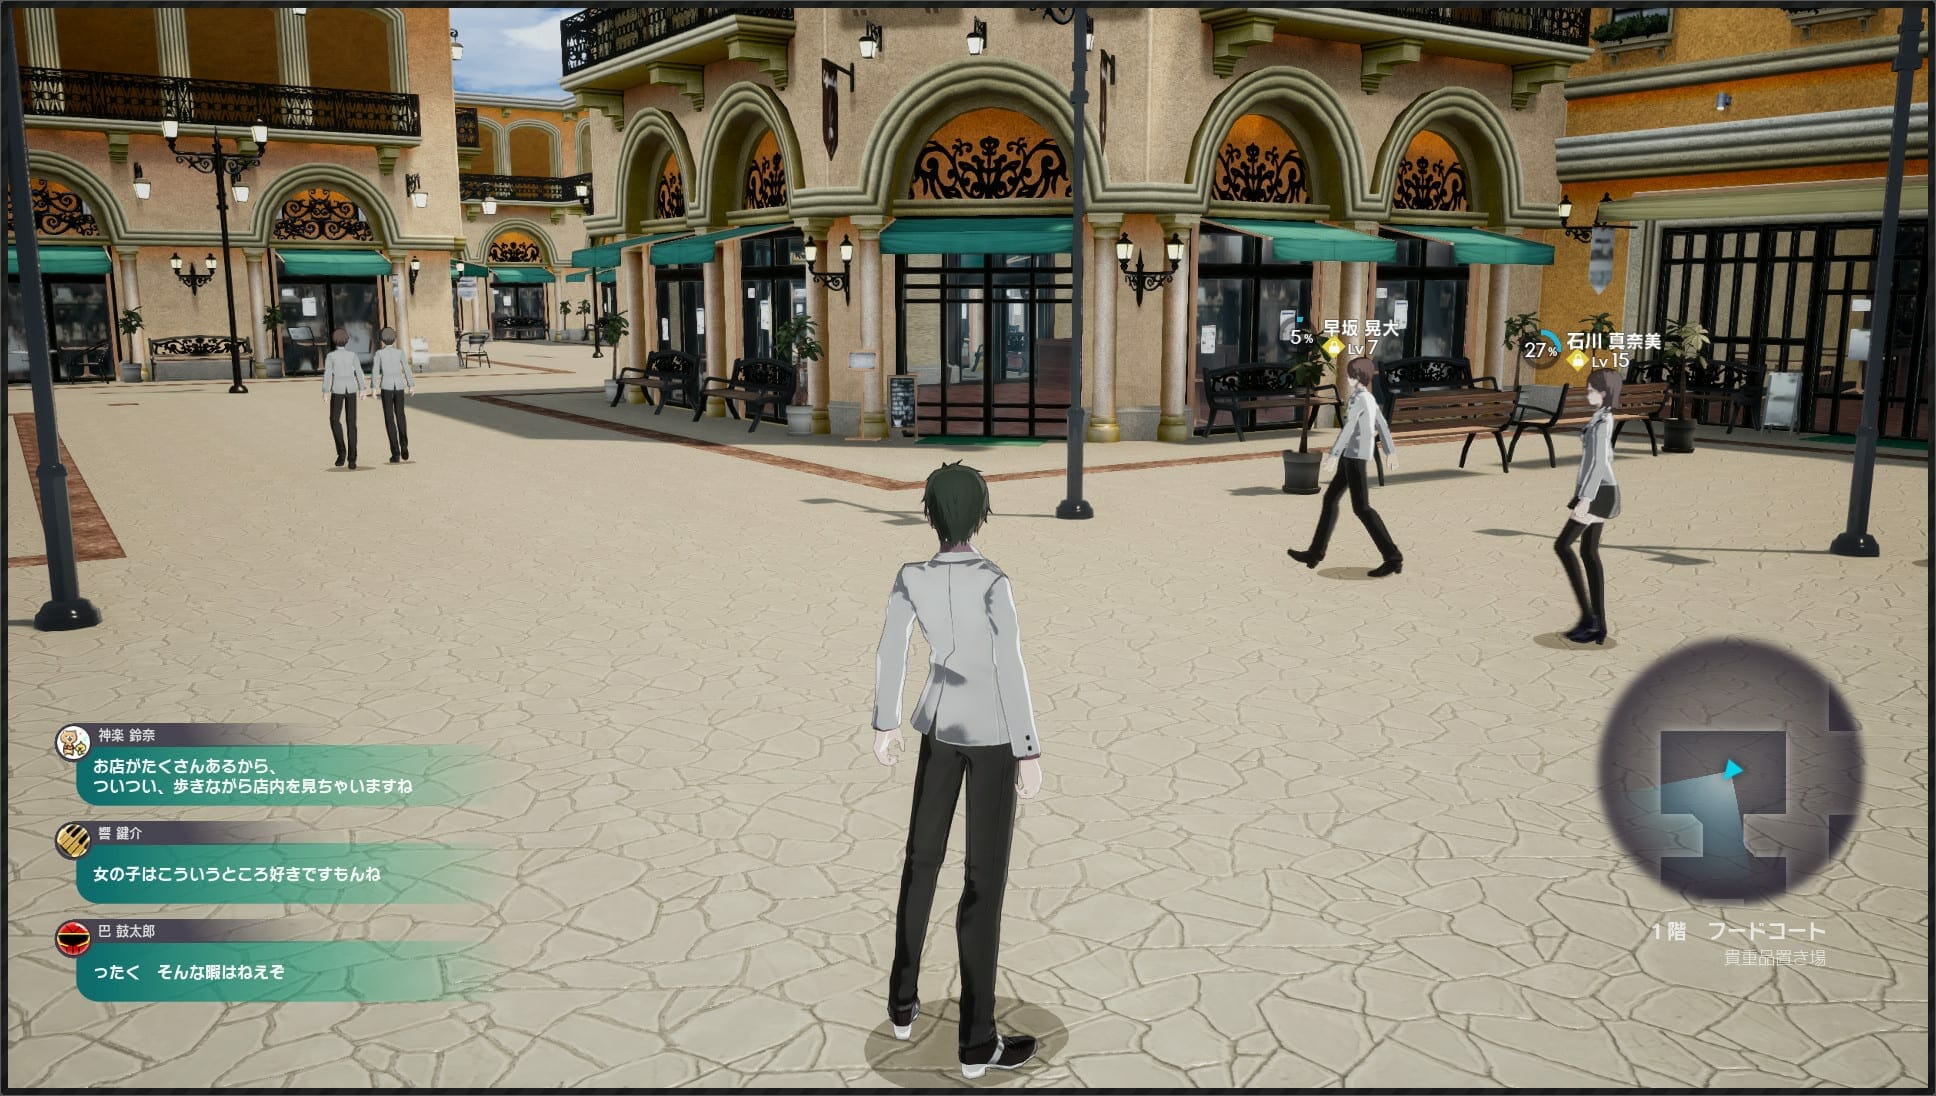 instal the new version for iphoneThe Caligula Effect 2